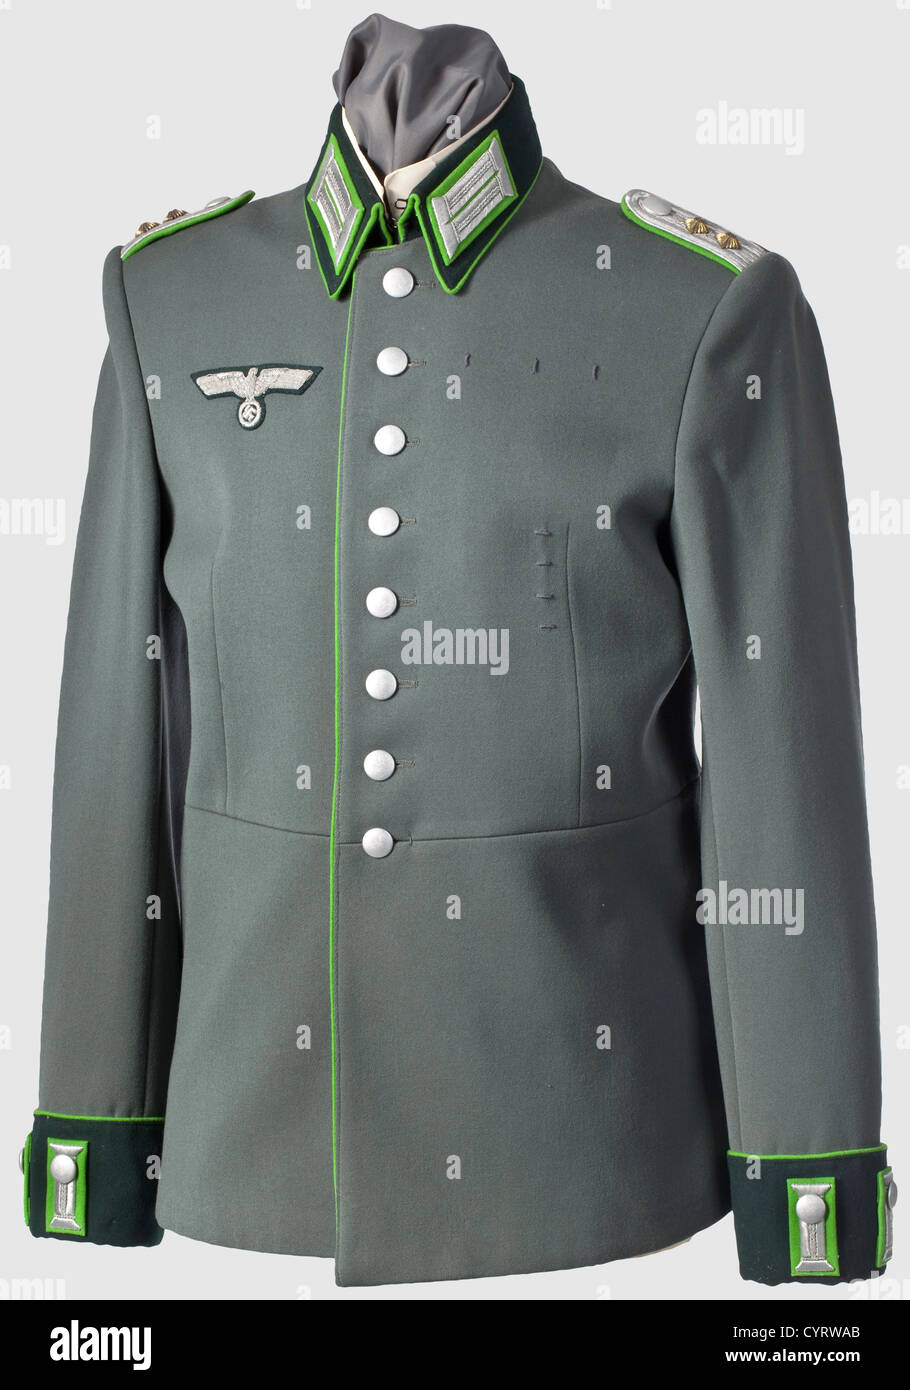 A tunic,for a captain of the panzer grenadiers Personal property piece of fine field-grey cloth with dark green collars and cuffs,meadow-green piping on collars,button fly,cuffs and coat tails. The insignia likewise with meadow-green underlay and silver embroidery,several order loops present,green silk lining. Also comes with a button-on collar and a pair of dress gloves . The meadow-green colour for Panzer Grenadiers was introduced in 1942. Thus,a tunic for this branch of service,and especially in mint condition,is correspondingly rare,historic,hist,Additional-Rights-Clearences-Not Available Stock Photo